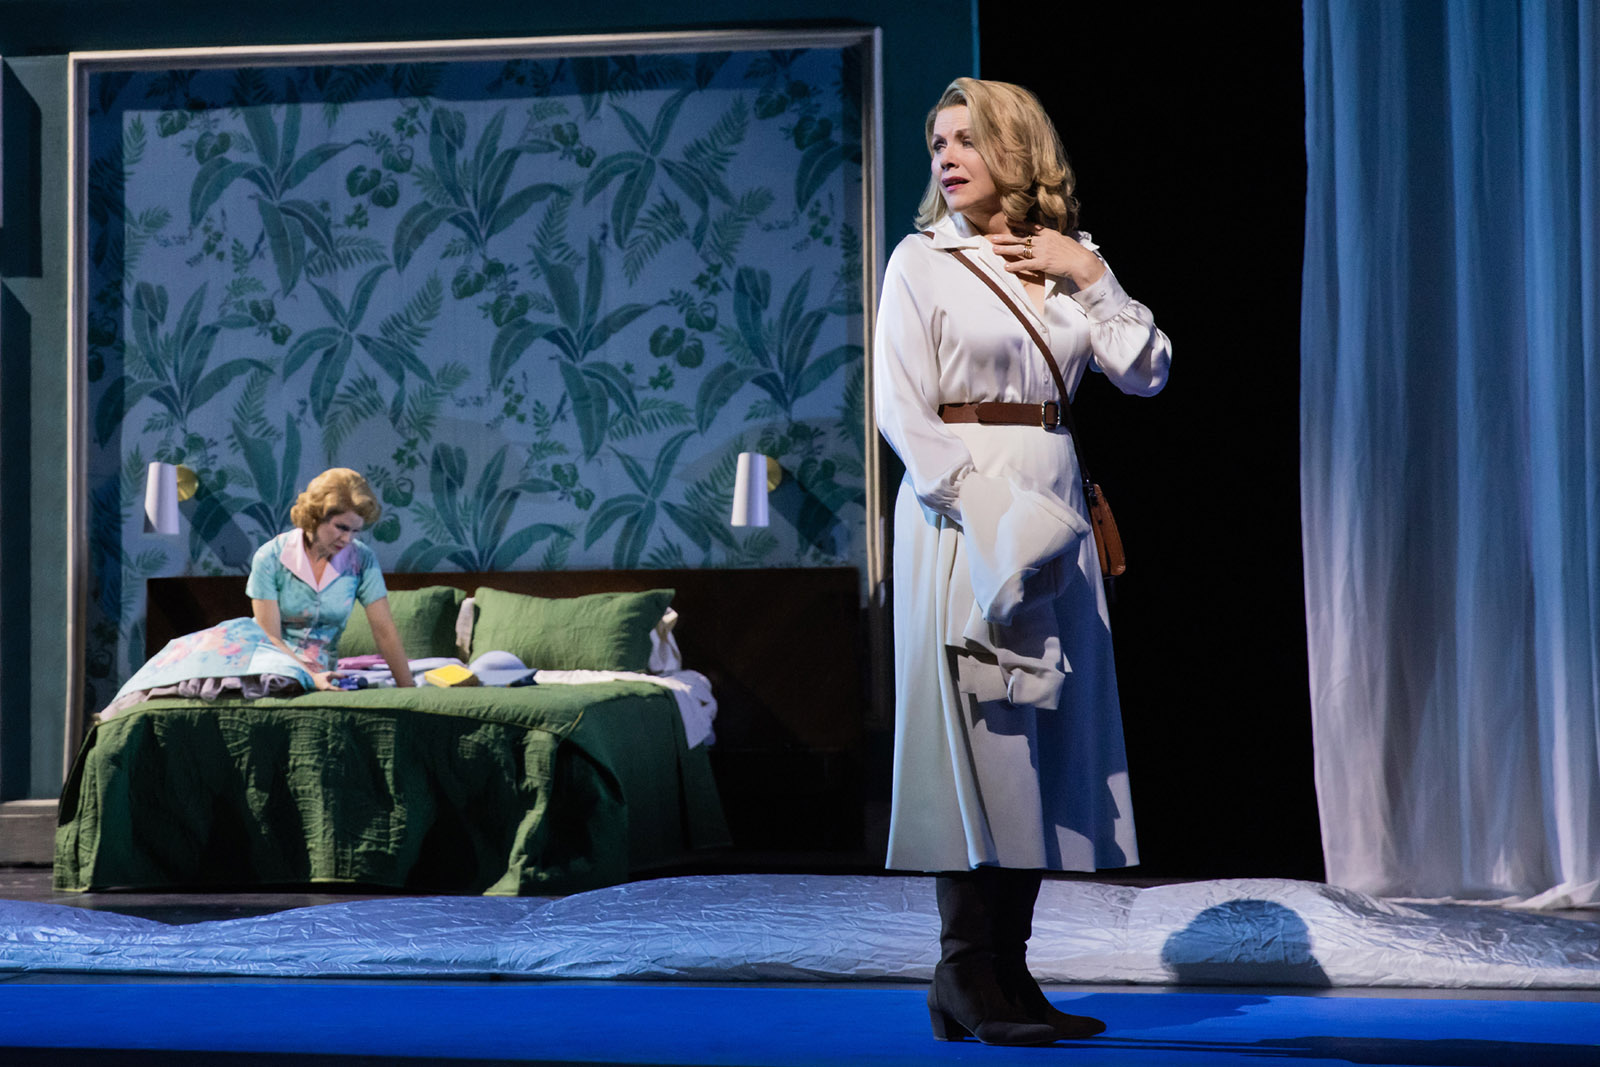 Kelli O’Hara as Laura Brown and Renée Fleming as Clarissa Vaughan in The Hours